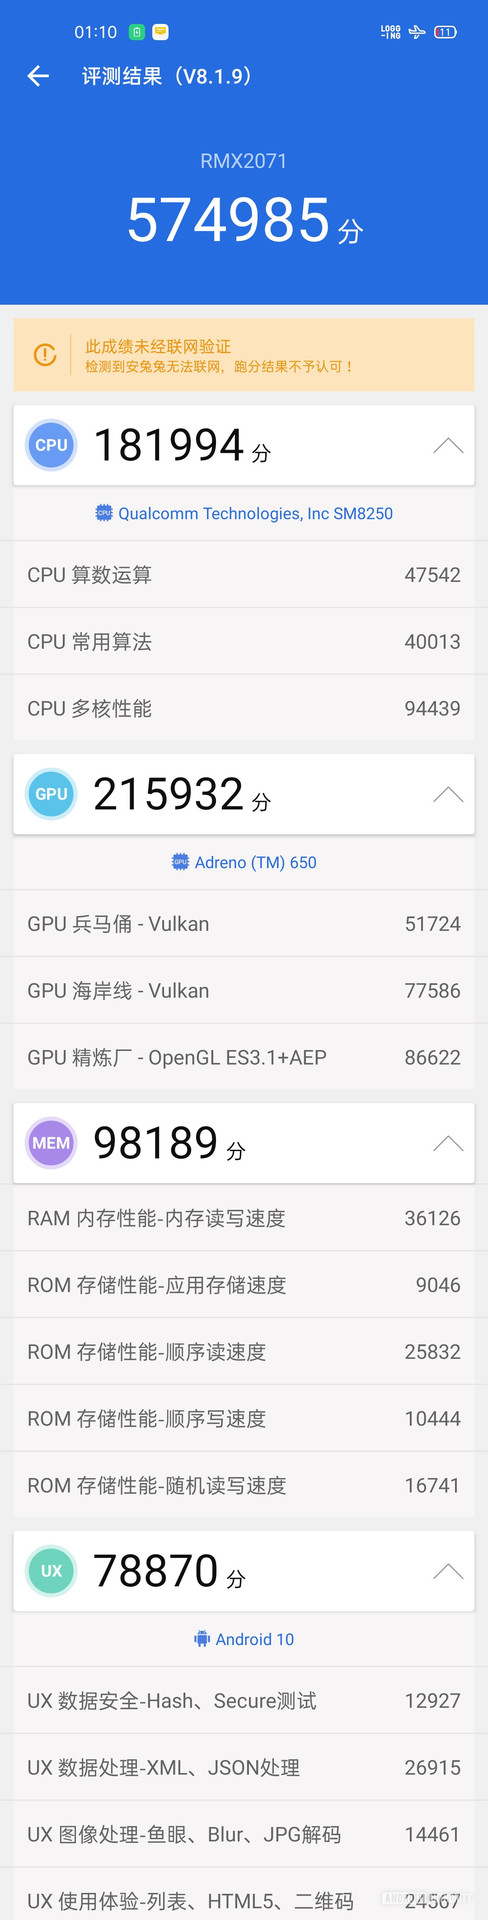 Realme RMX2071 AnTuTu benchmark result Android Authority full